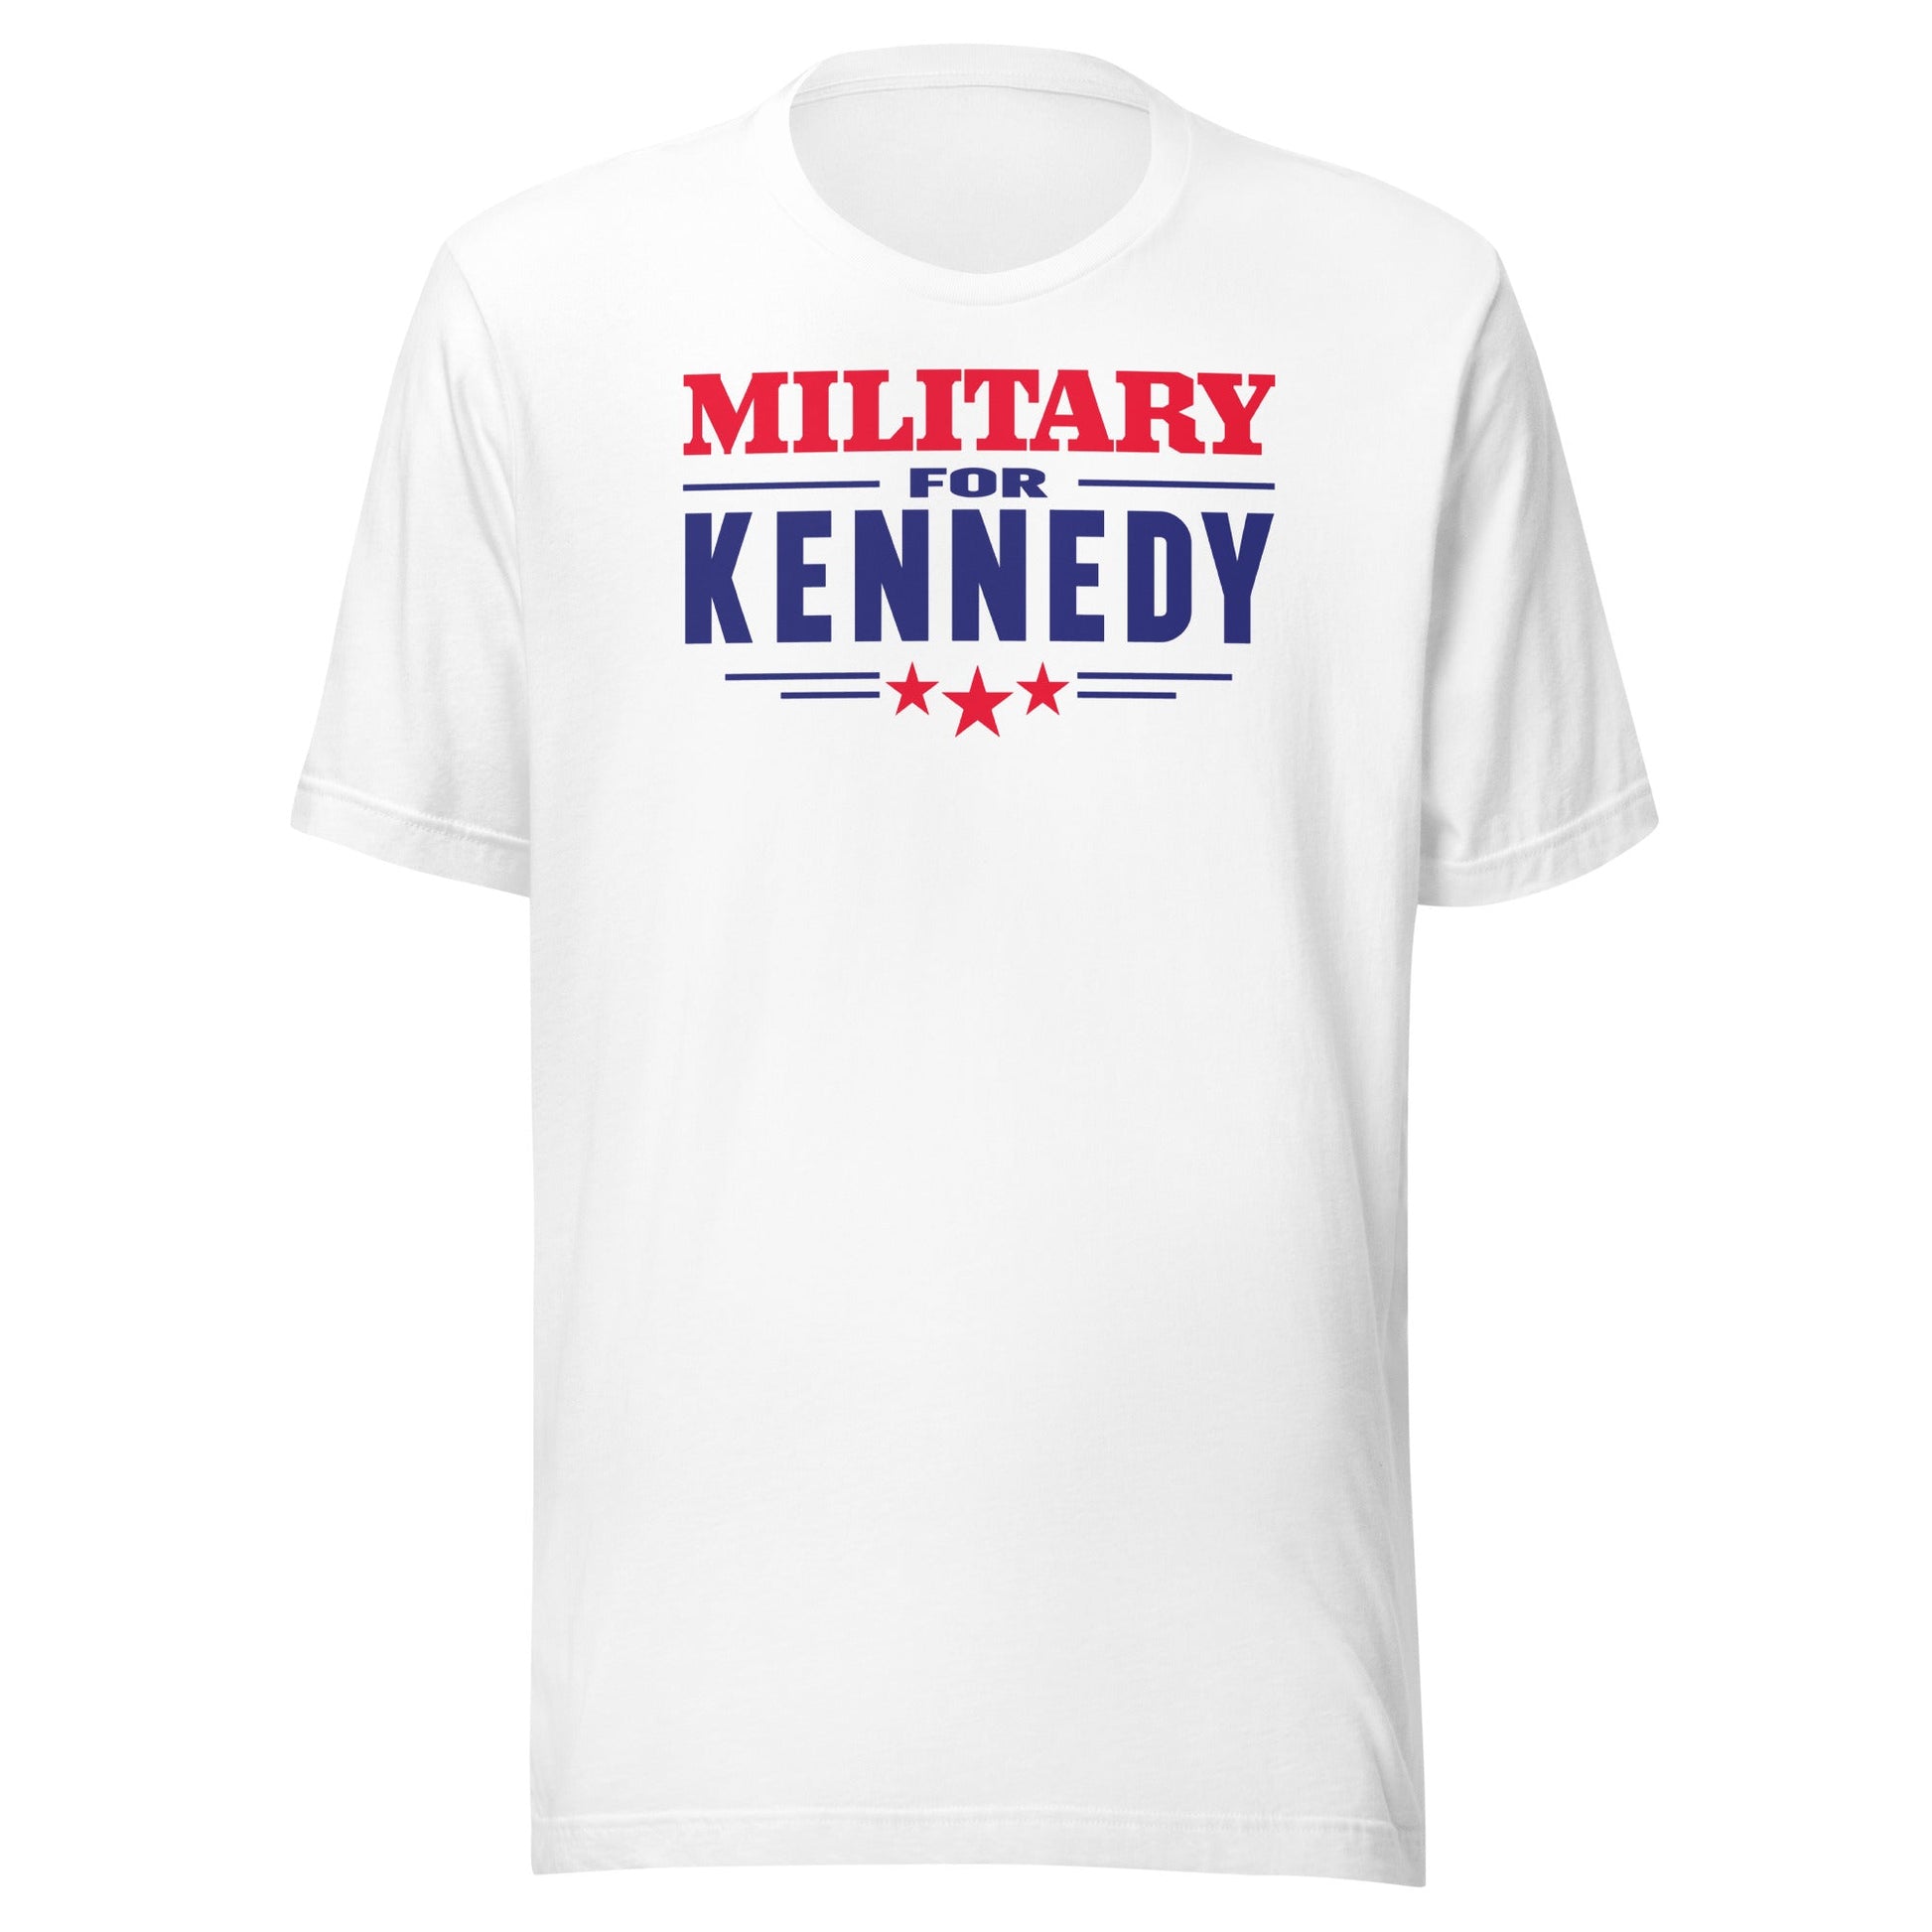 Military for Kennedy Unisex Tee - TEAM KENNEDY. All rights reserved